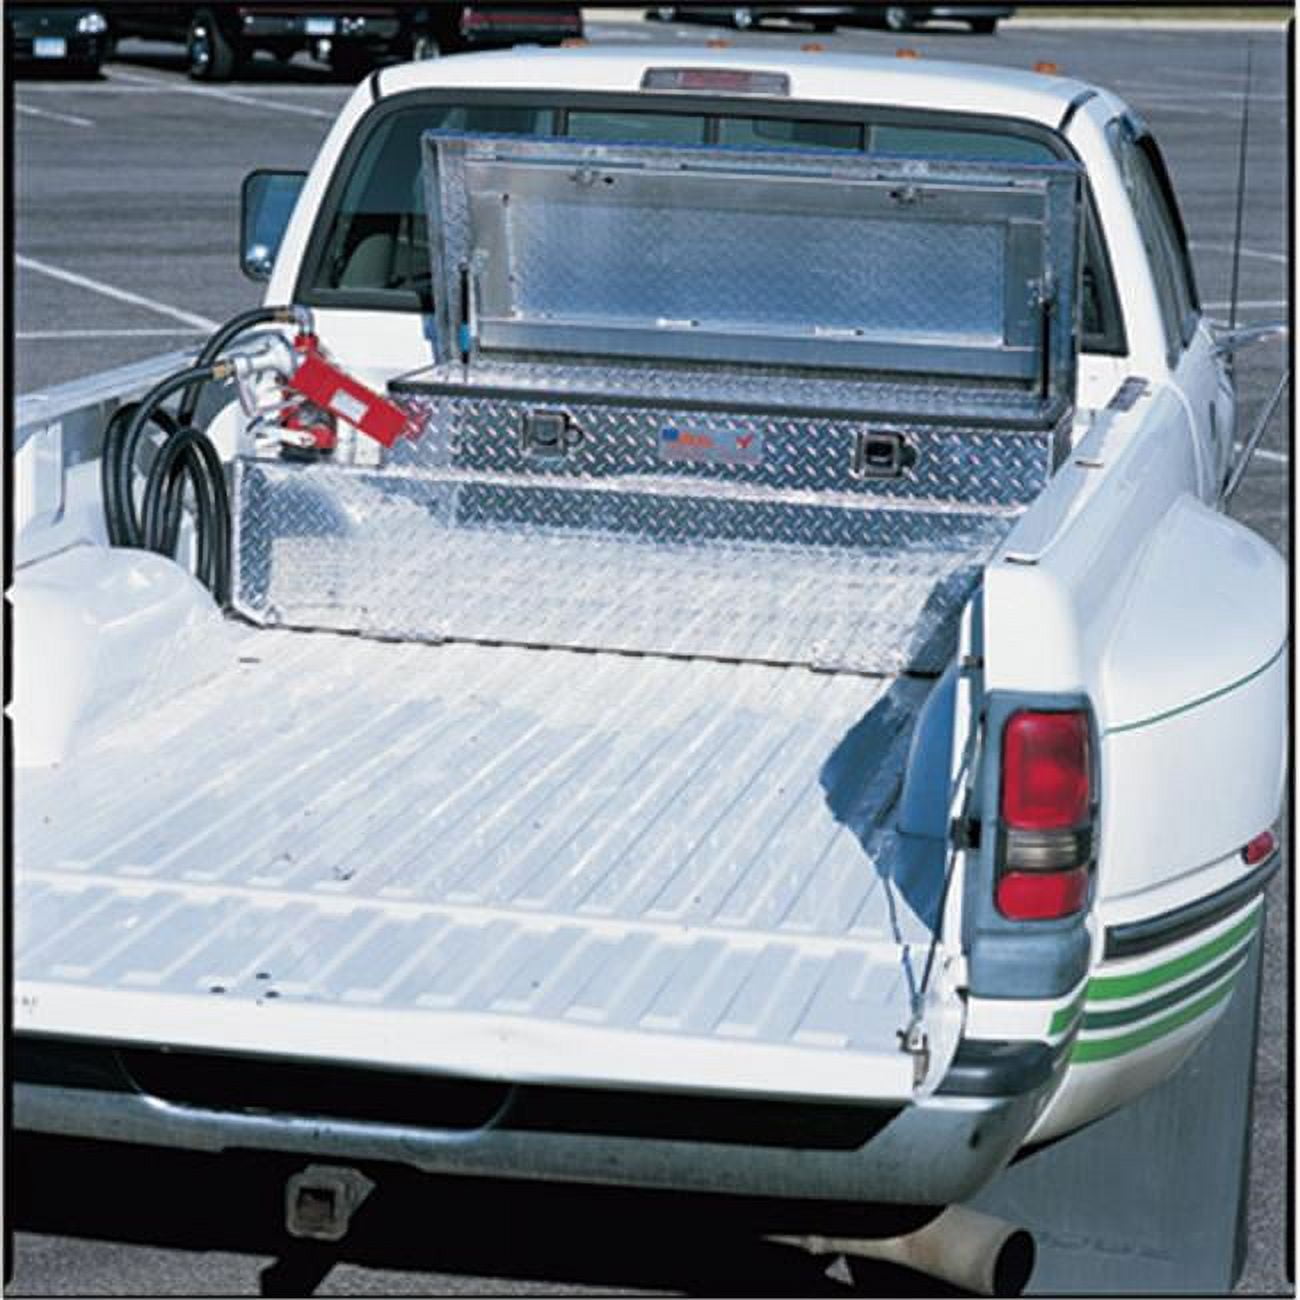 65 Gallon Aluminum Pick Up Truck Combo Toolbox and Auxiliary Fuel Tank